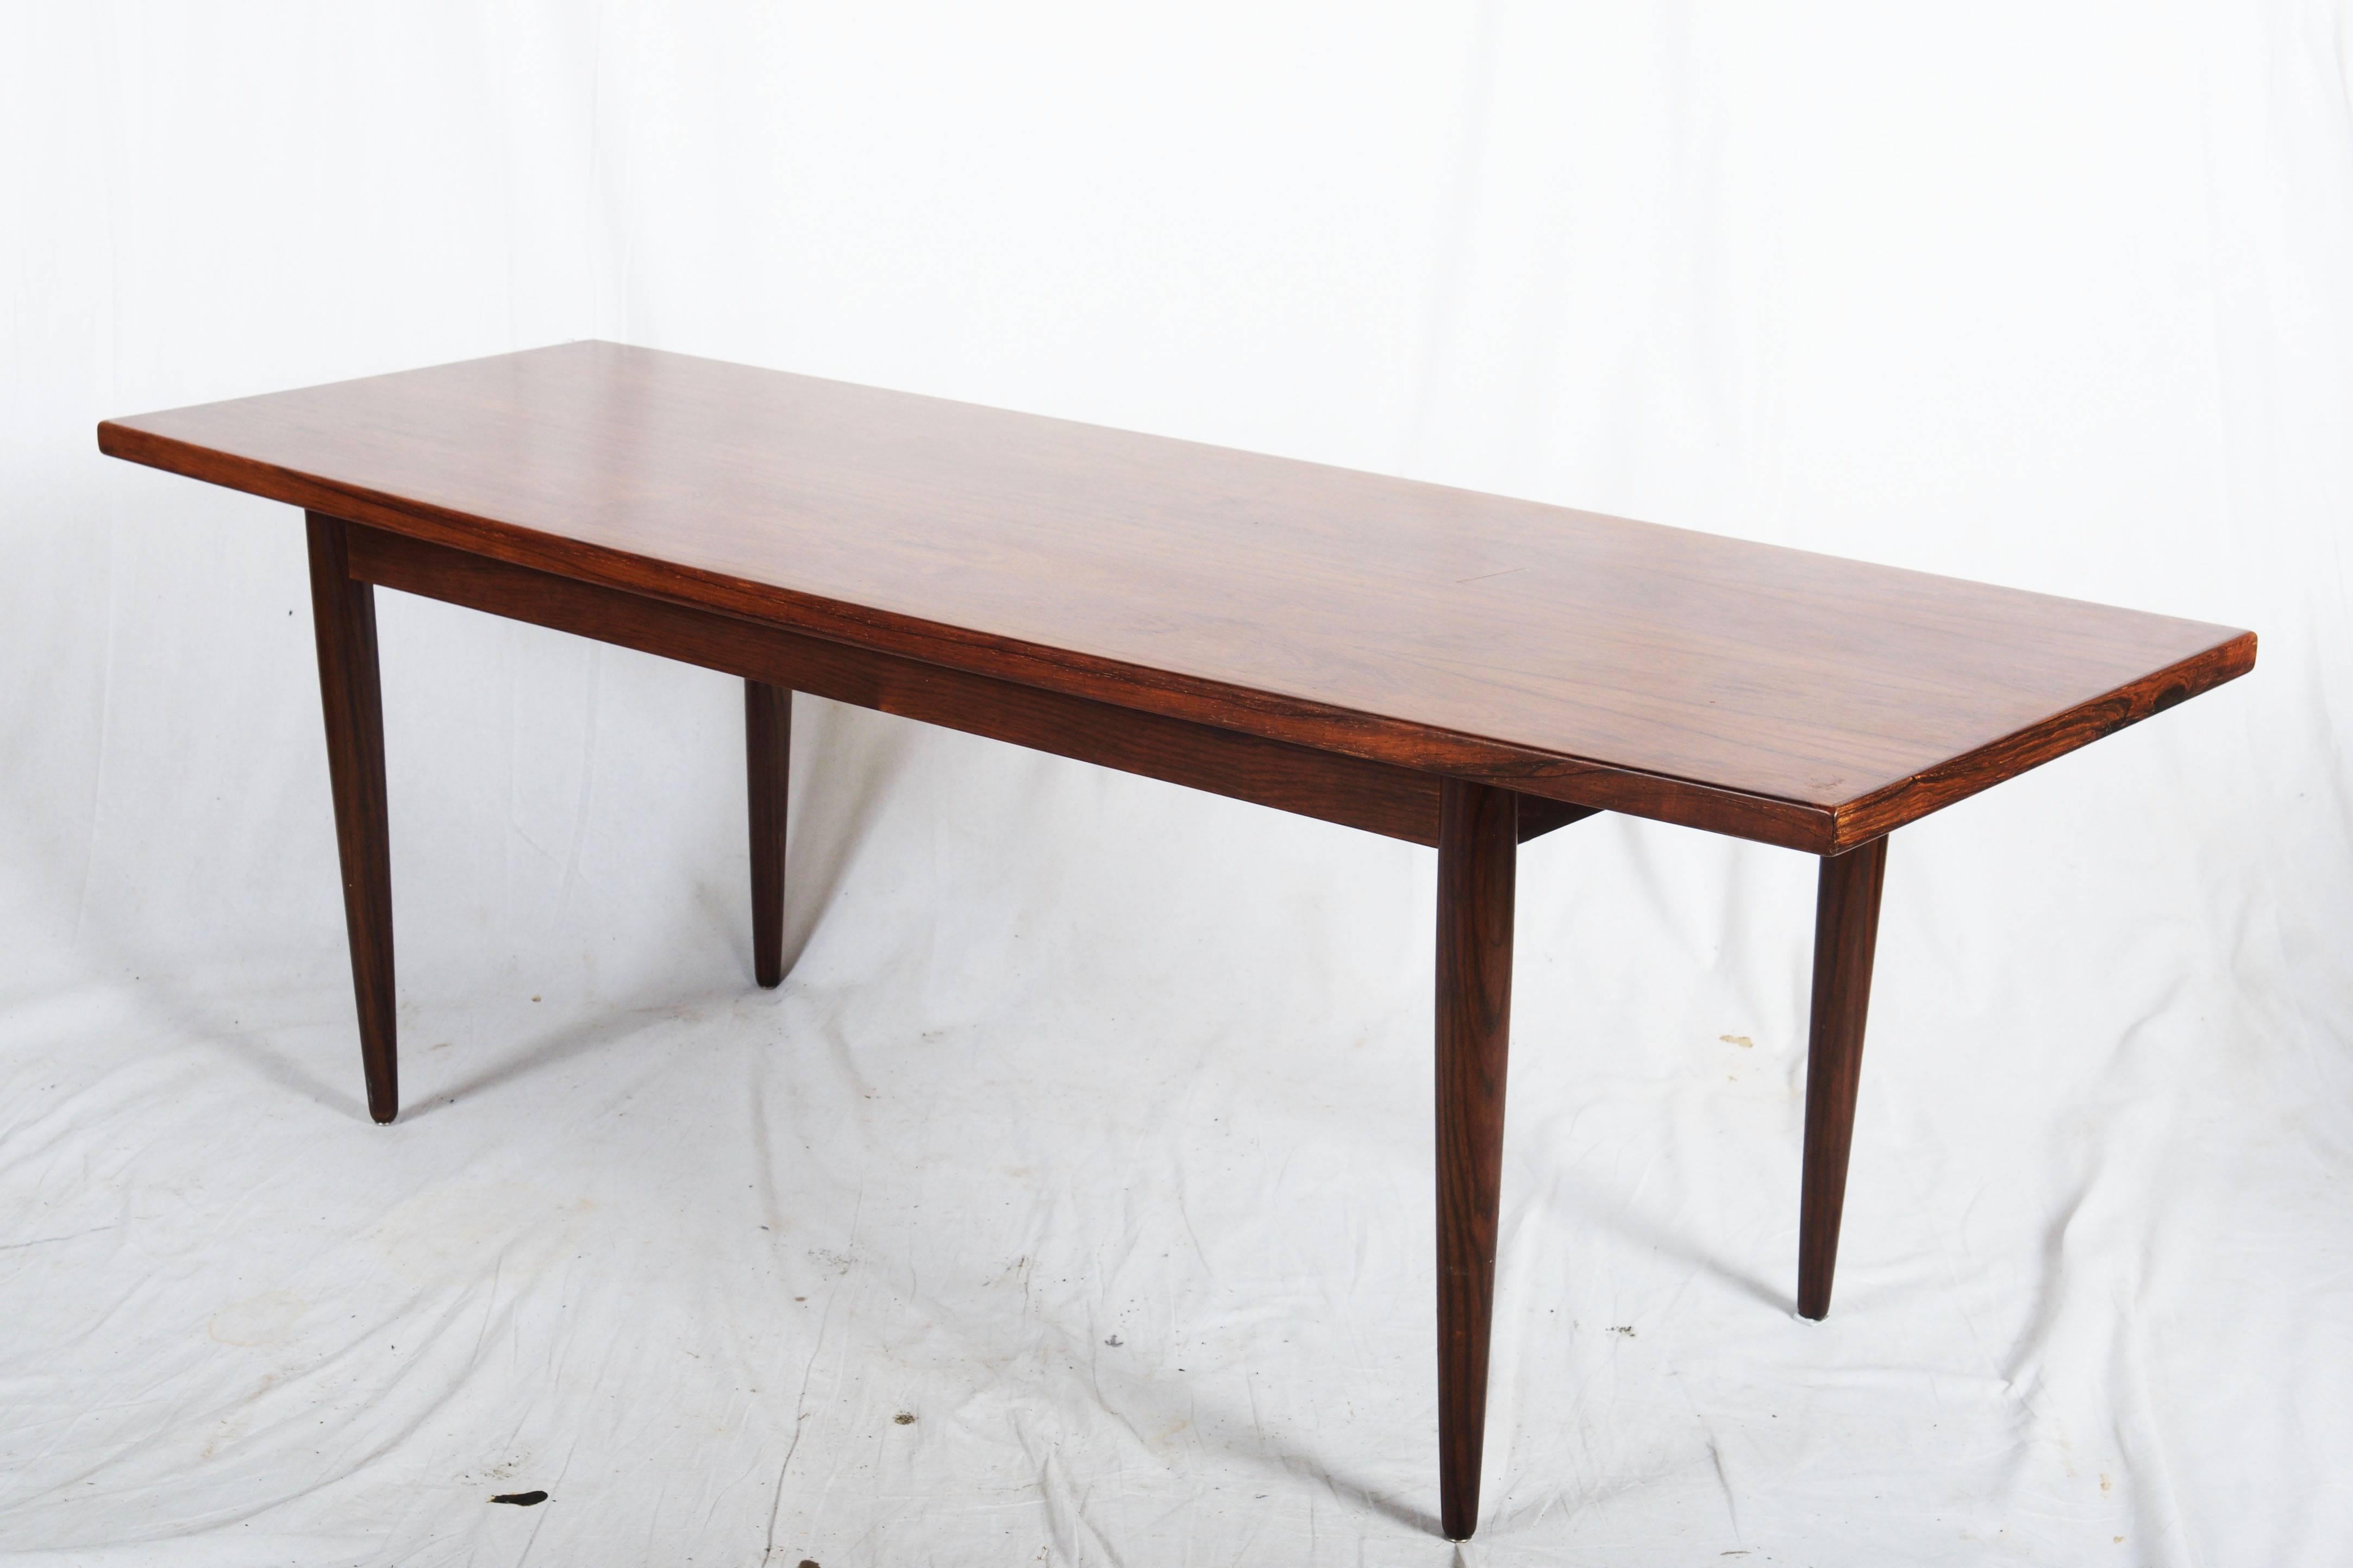 Solid hardwood with veneer made in the 1960s in Denmark. Signed 